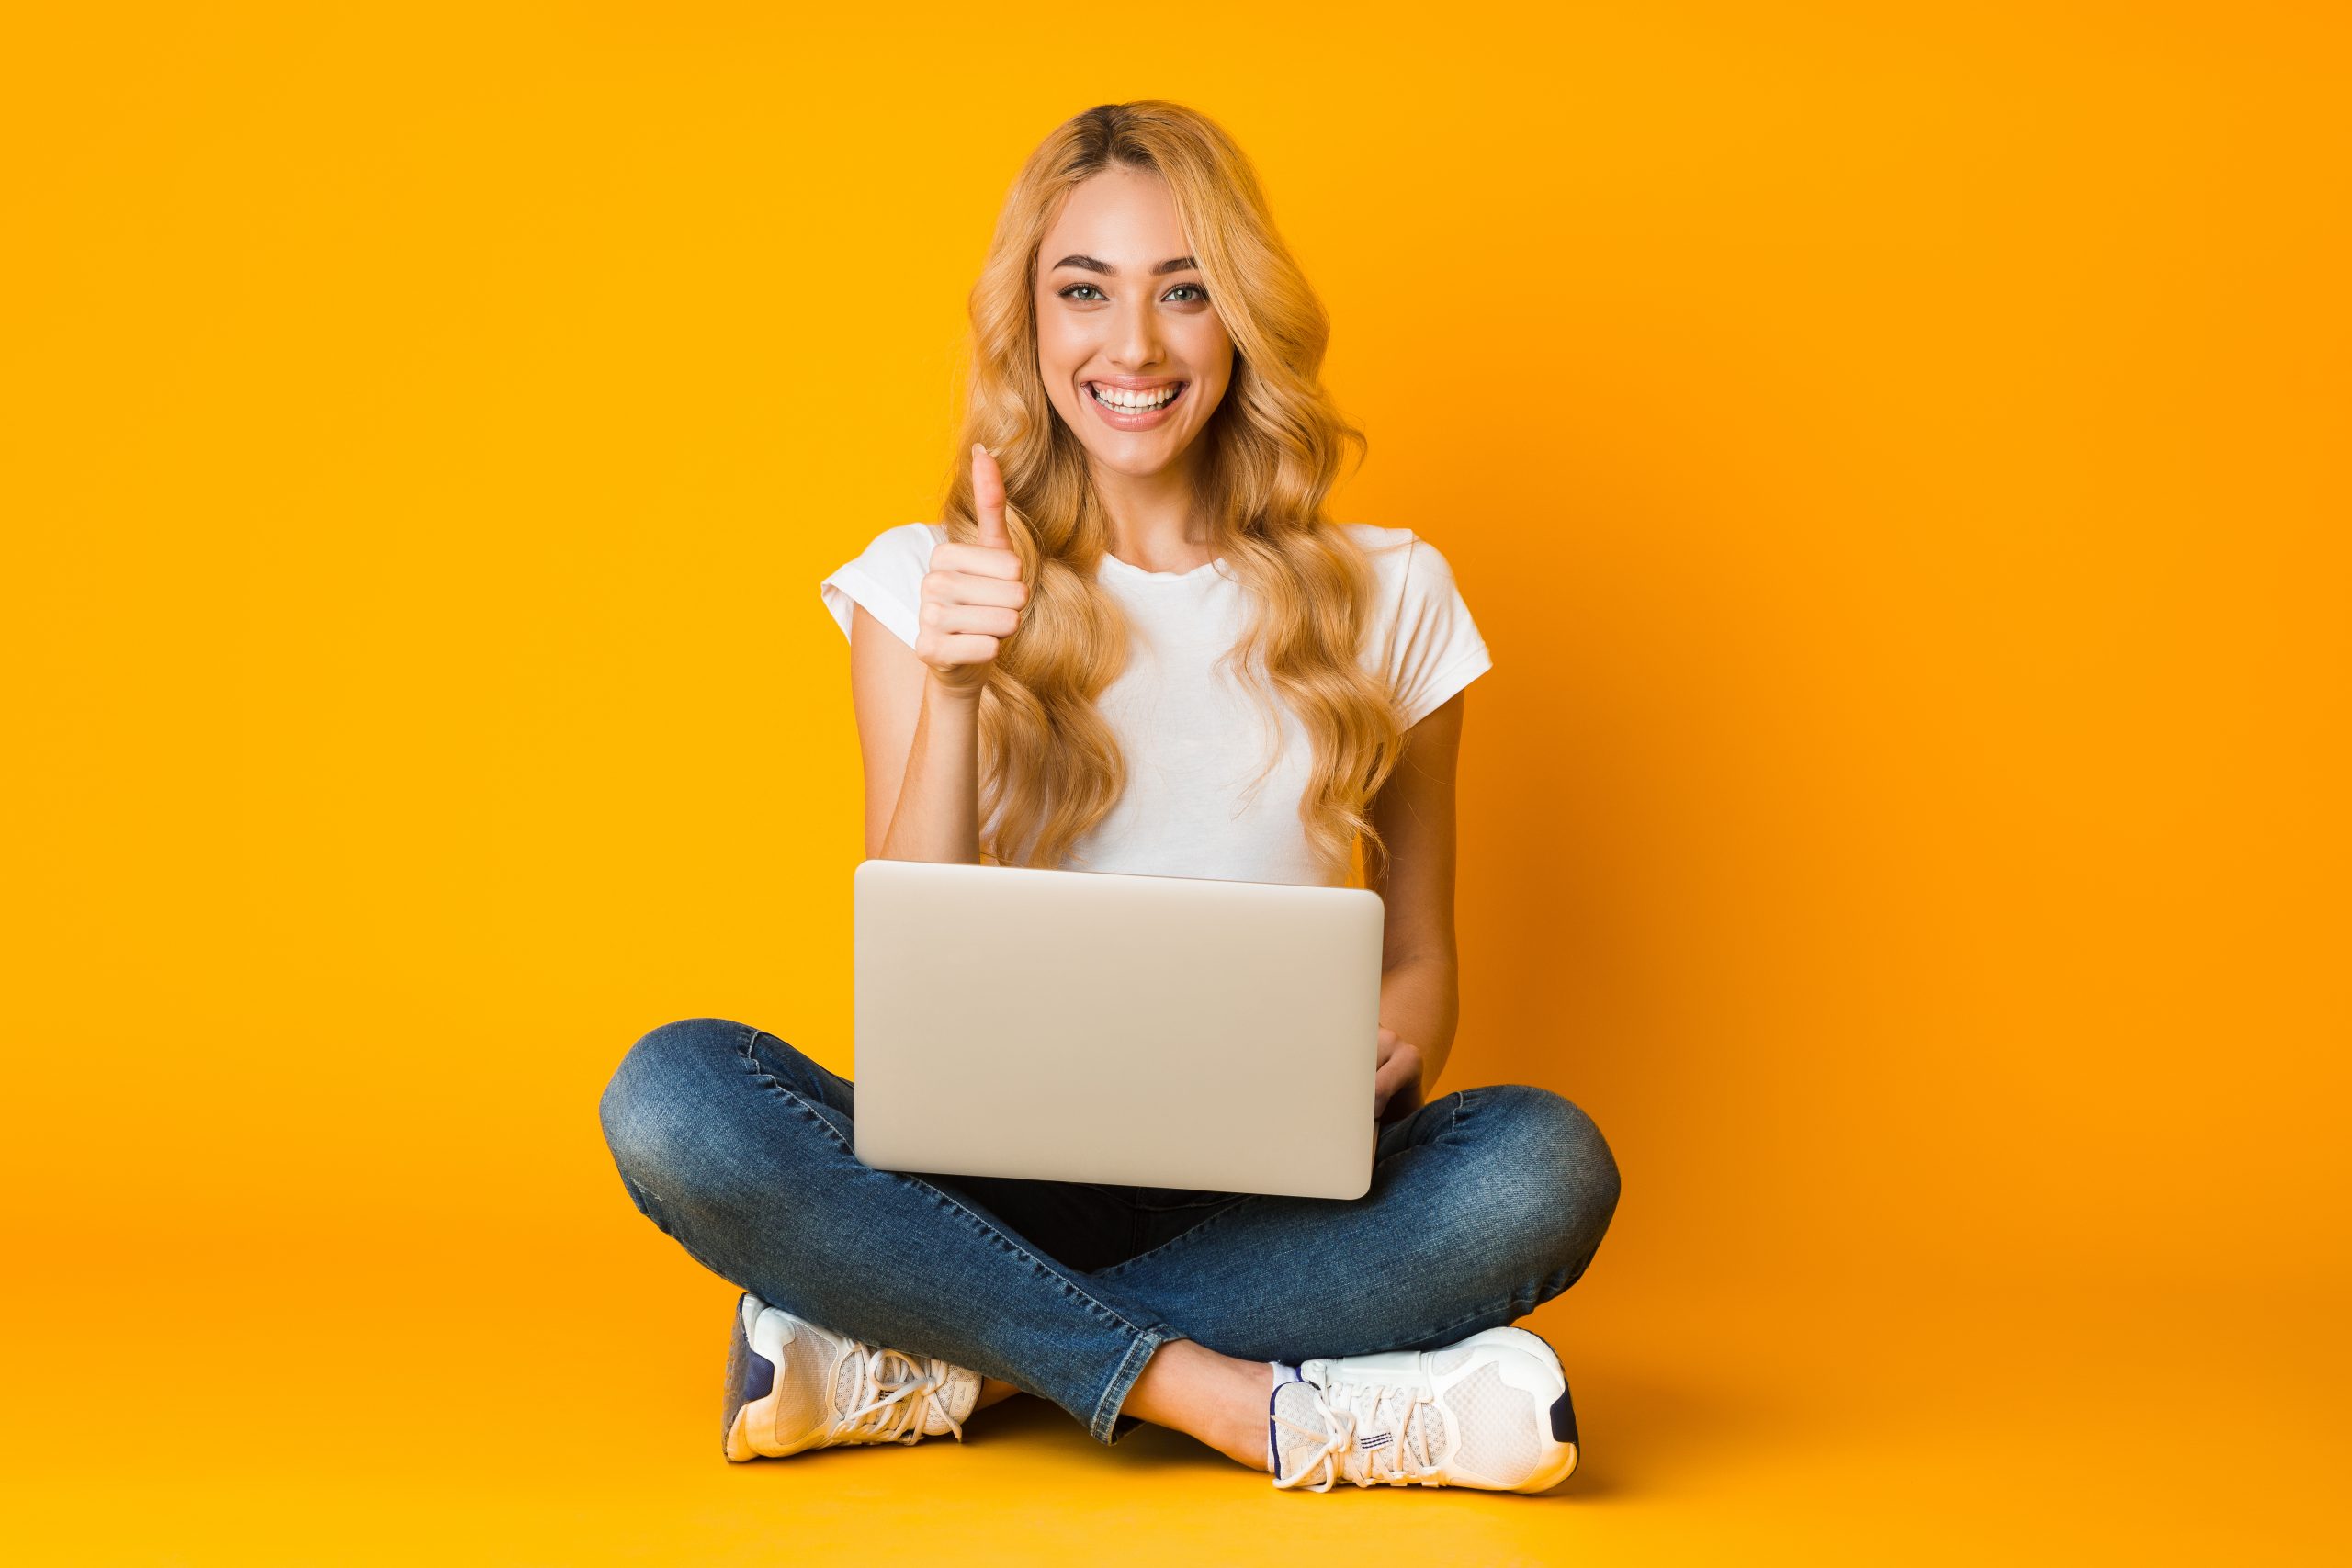 Cheerful woman using laptop and showing thumb up on yellow studio background, smiling to camera